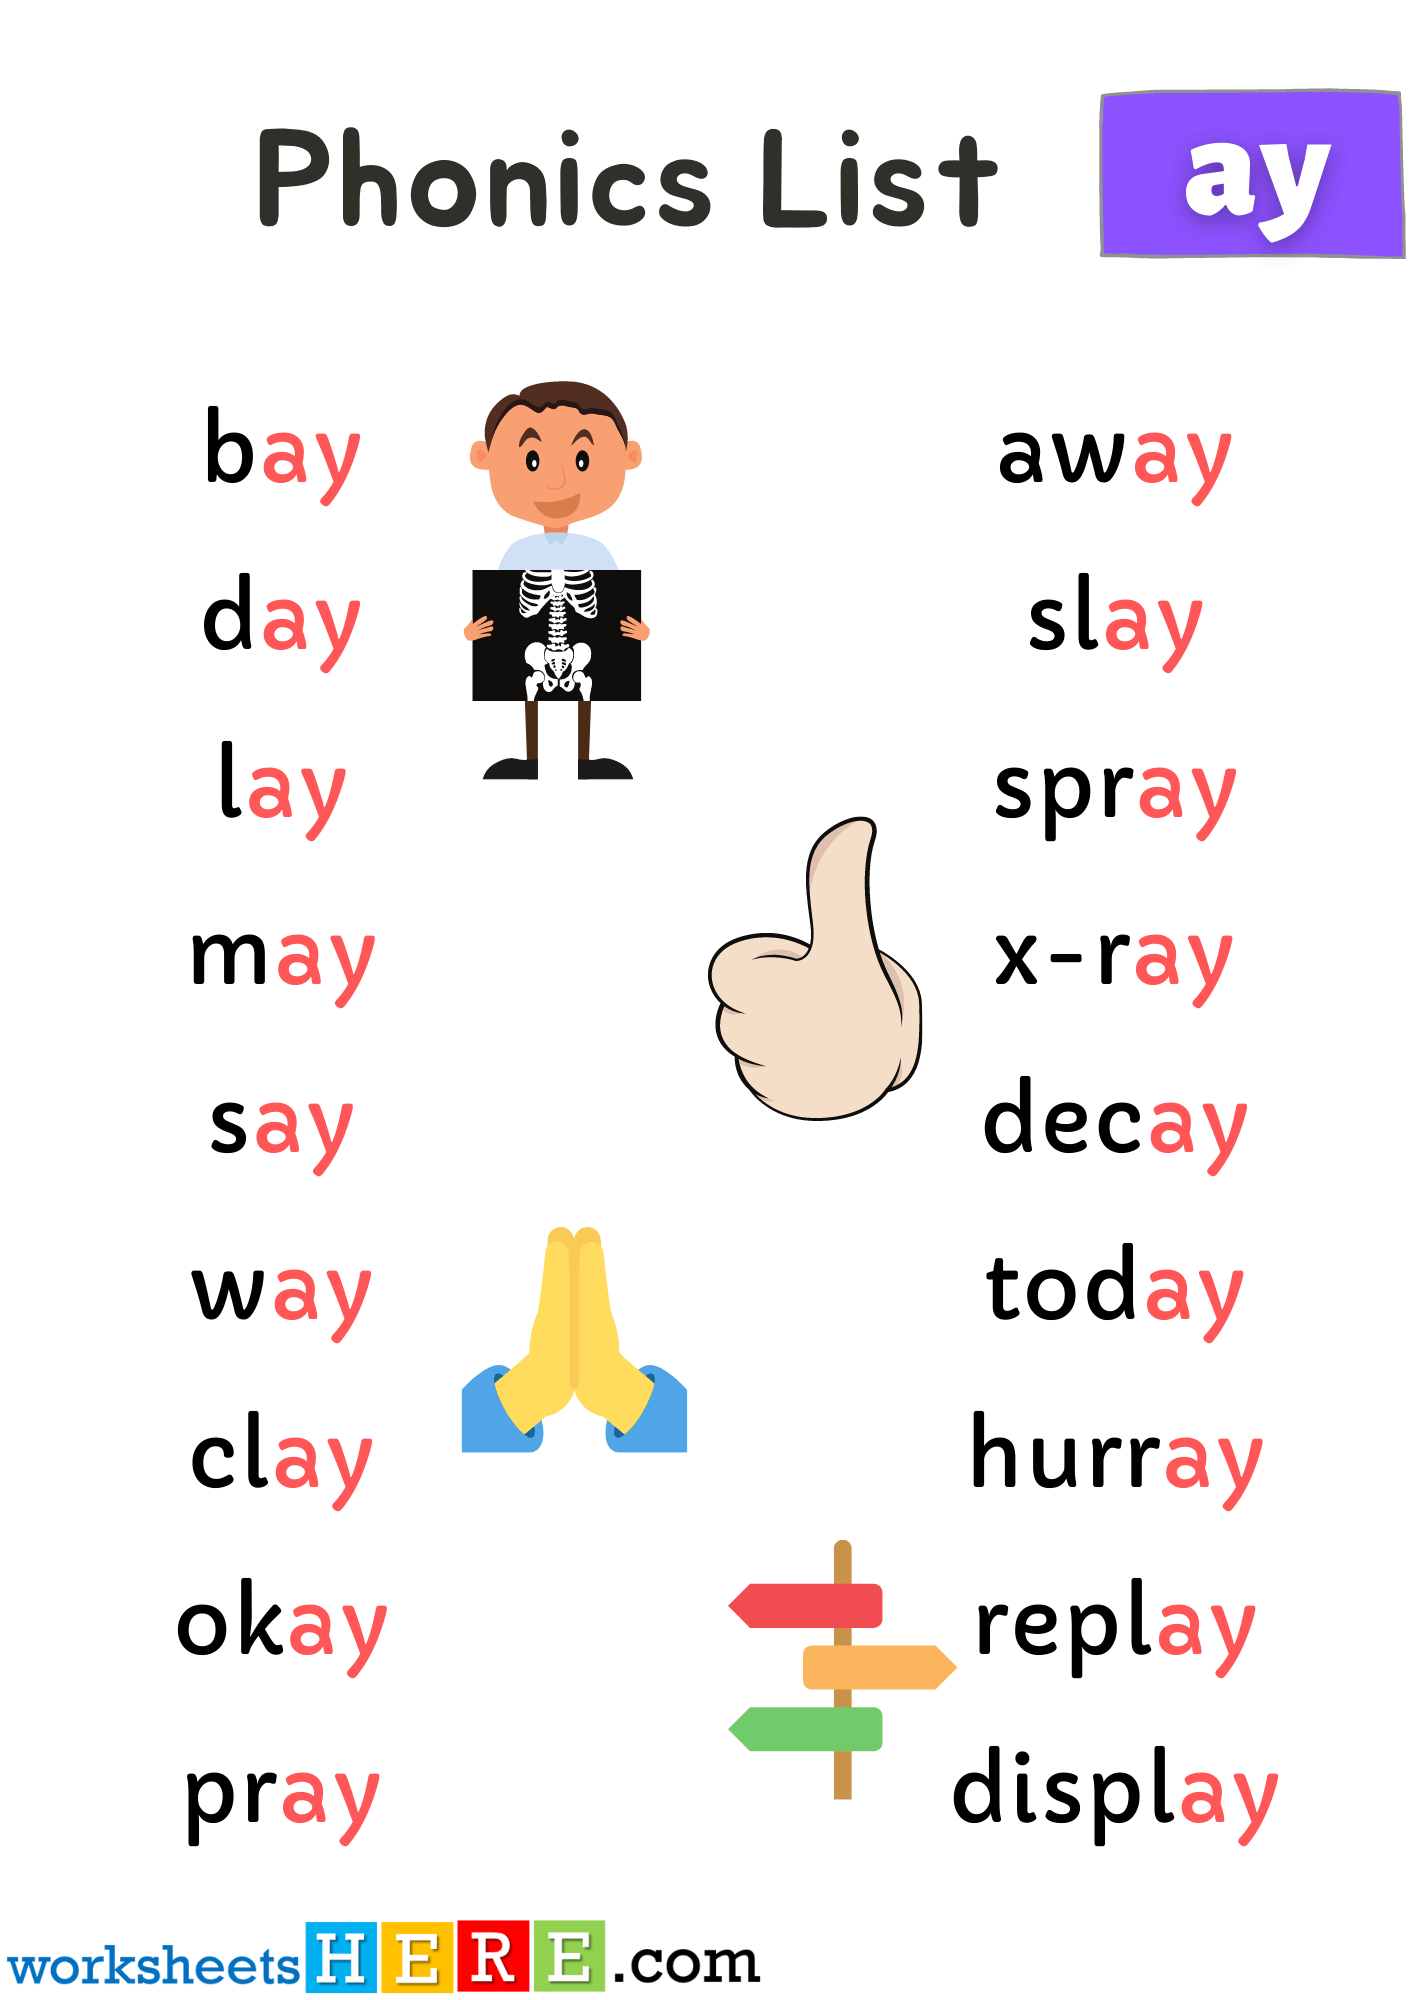 Spelling Phonics ‘ay’ Sounds PDF Worksheet For Kids and Students